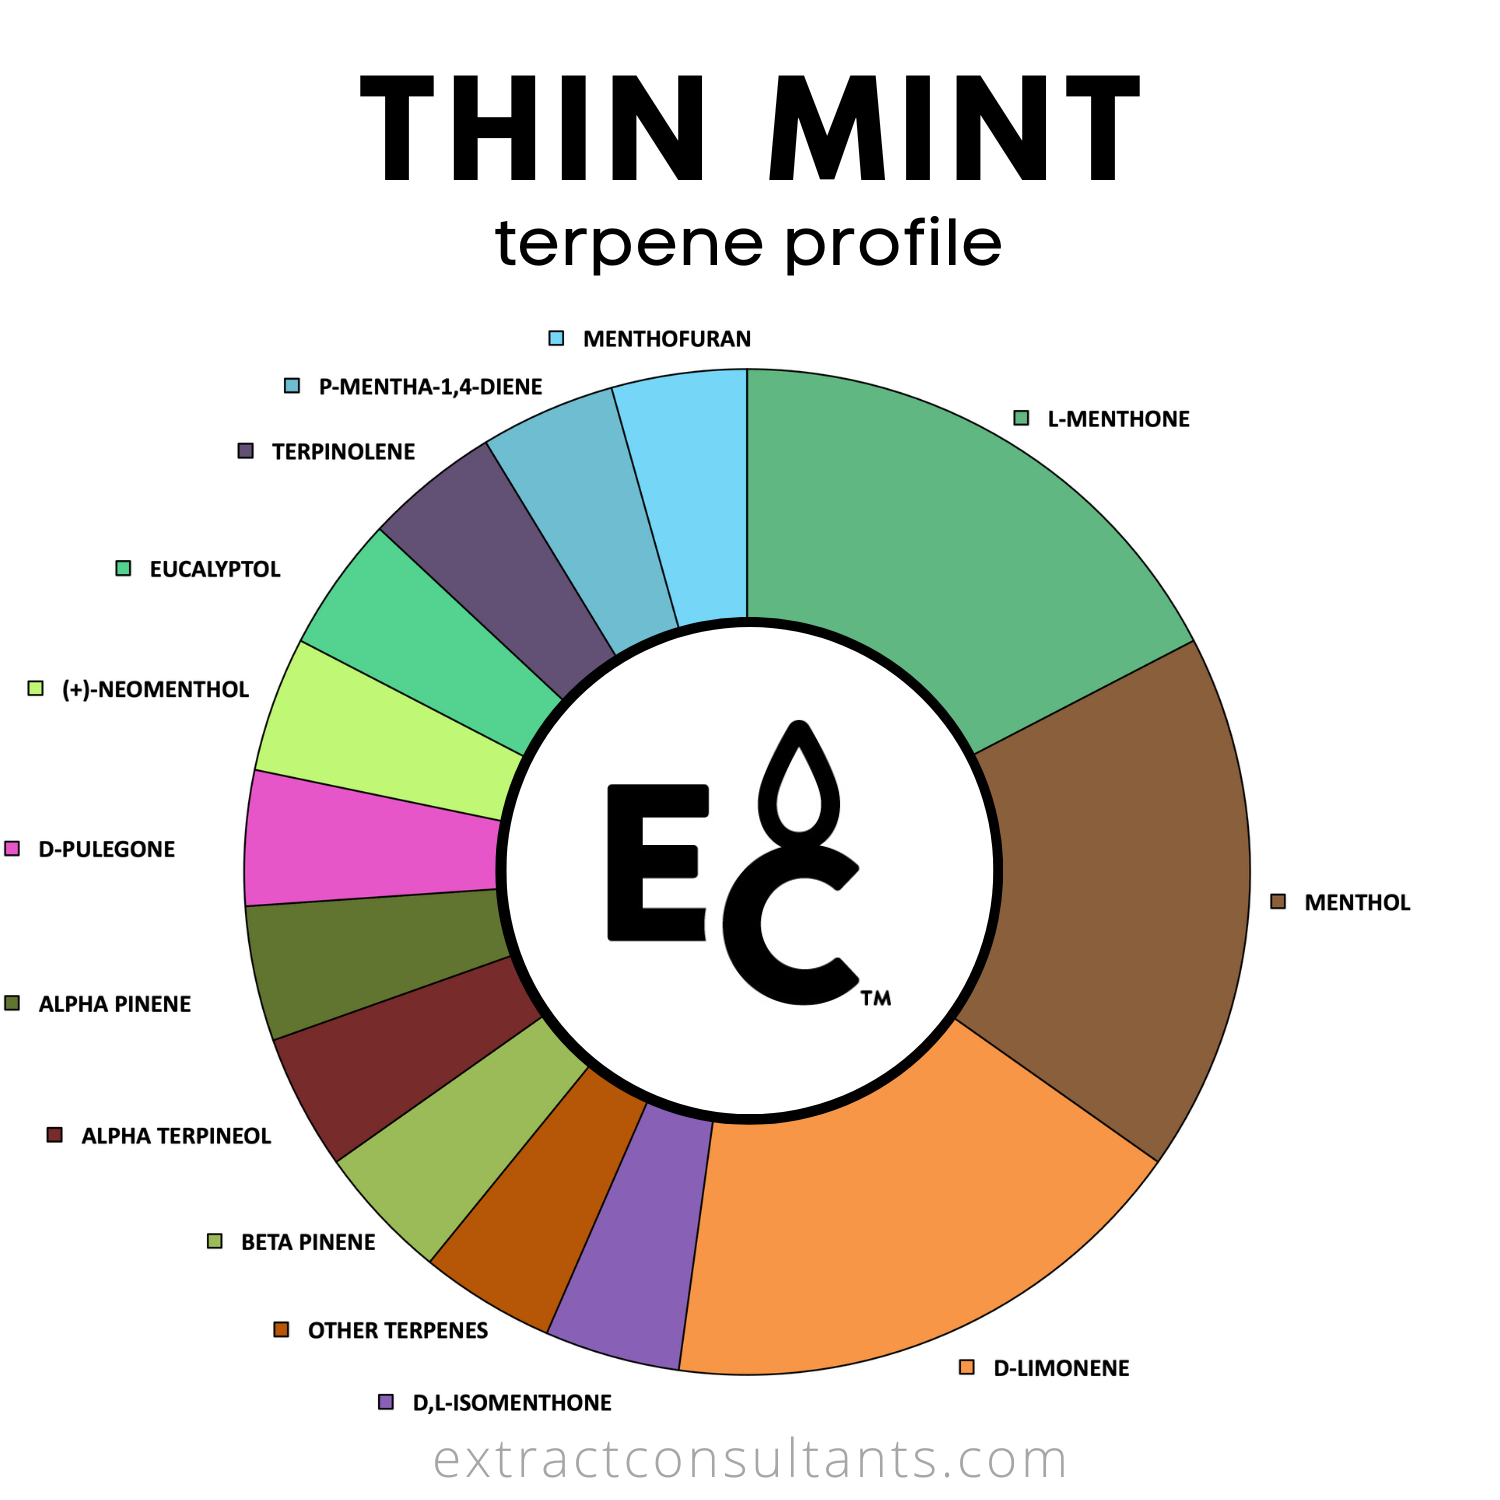 Thin Mint Solvent Free Terpene Flavor